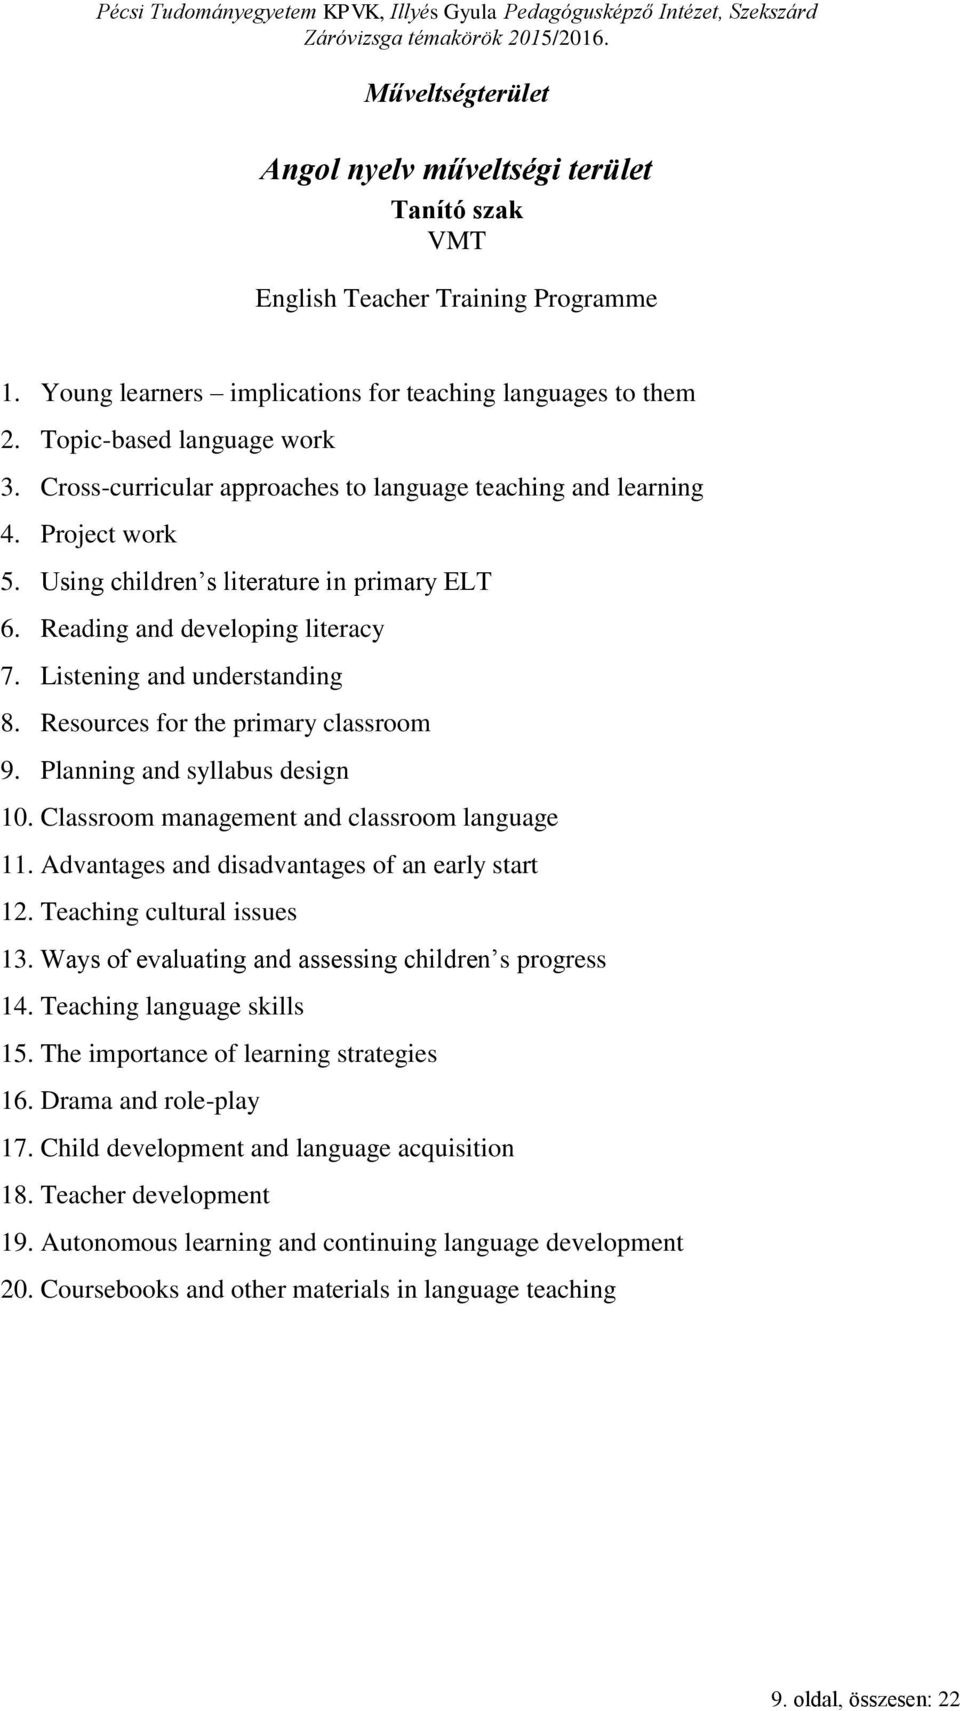 Resources for the primary classroom 9. Planning and syllabus design 10. Classroom management and classroom language 11. Advantages and disadvantages of an early start 12. Teaching cultural issues 13.